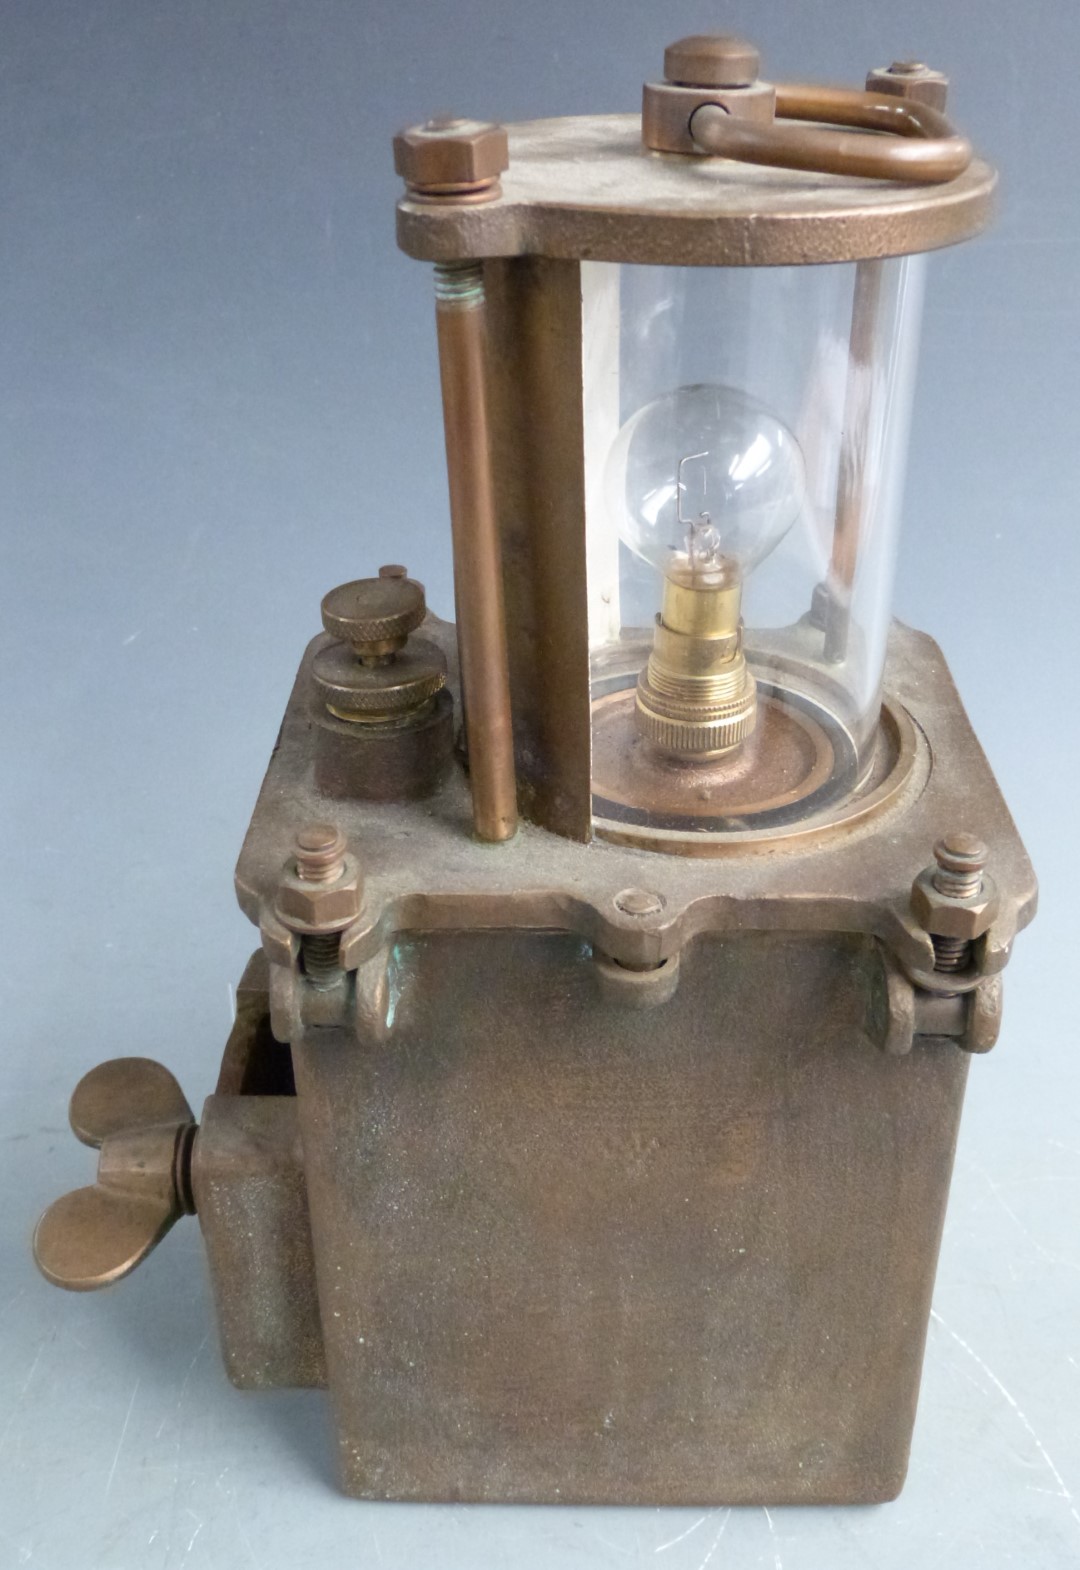 Bronze emergency navigation light for a submarine with impressed 'Alaig' and 6220-99-925-6951, - Image 2 of 3